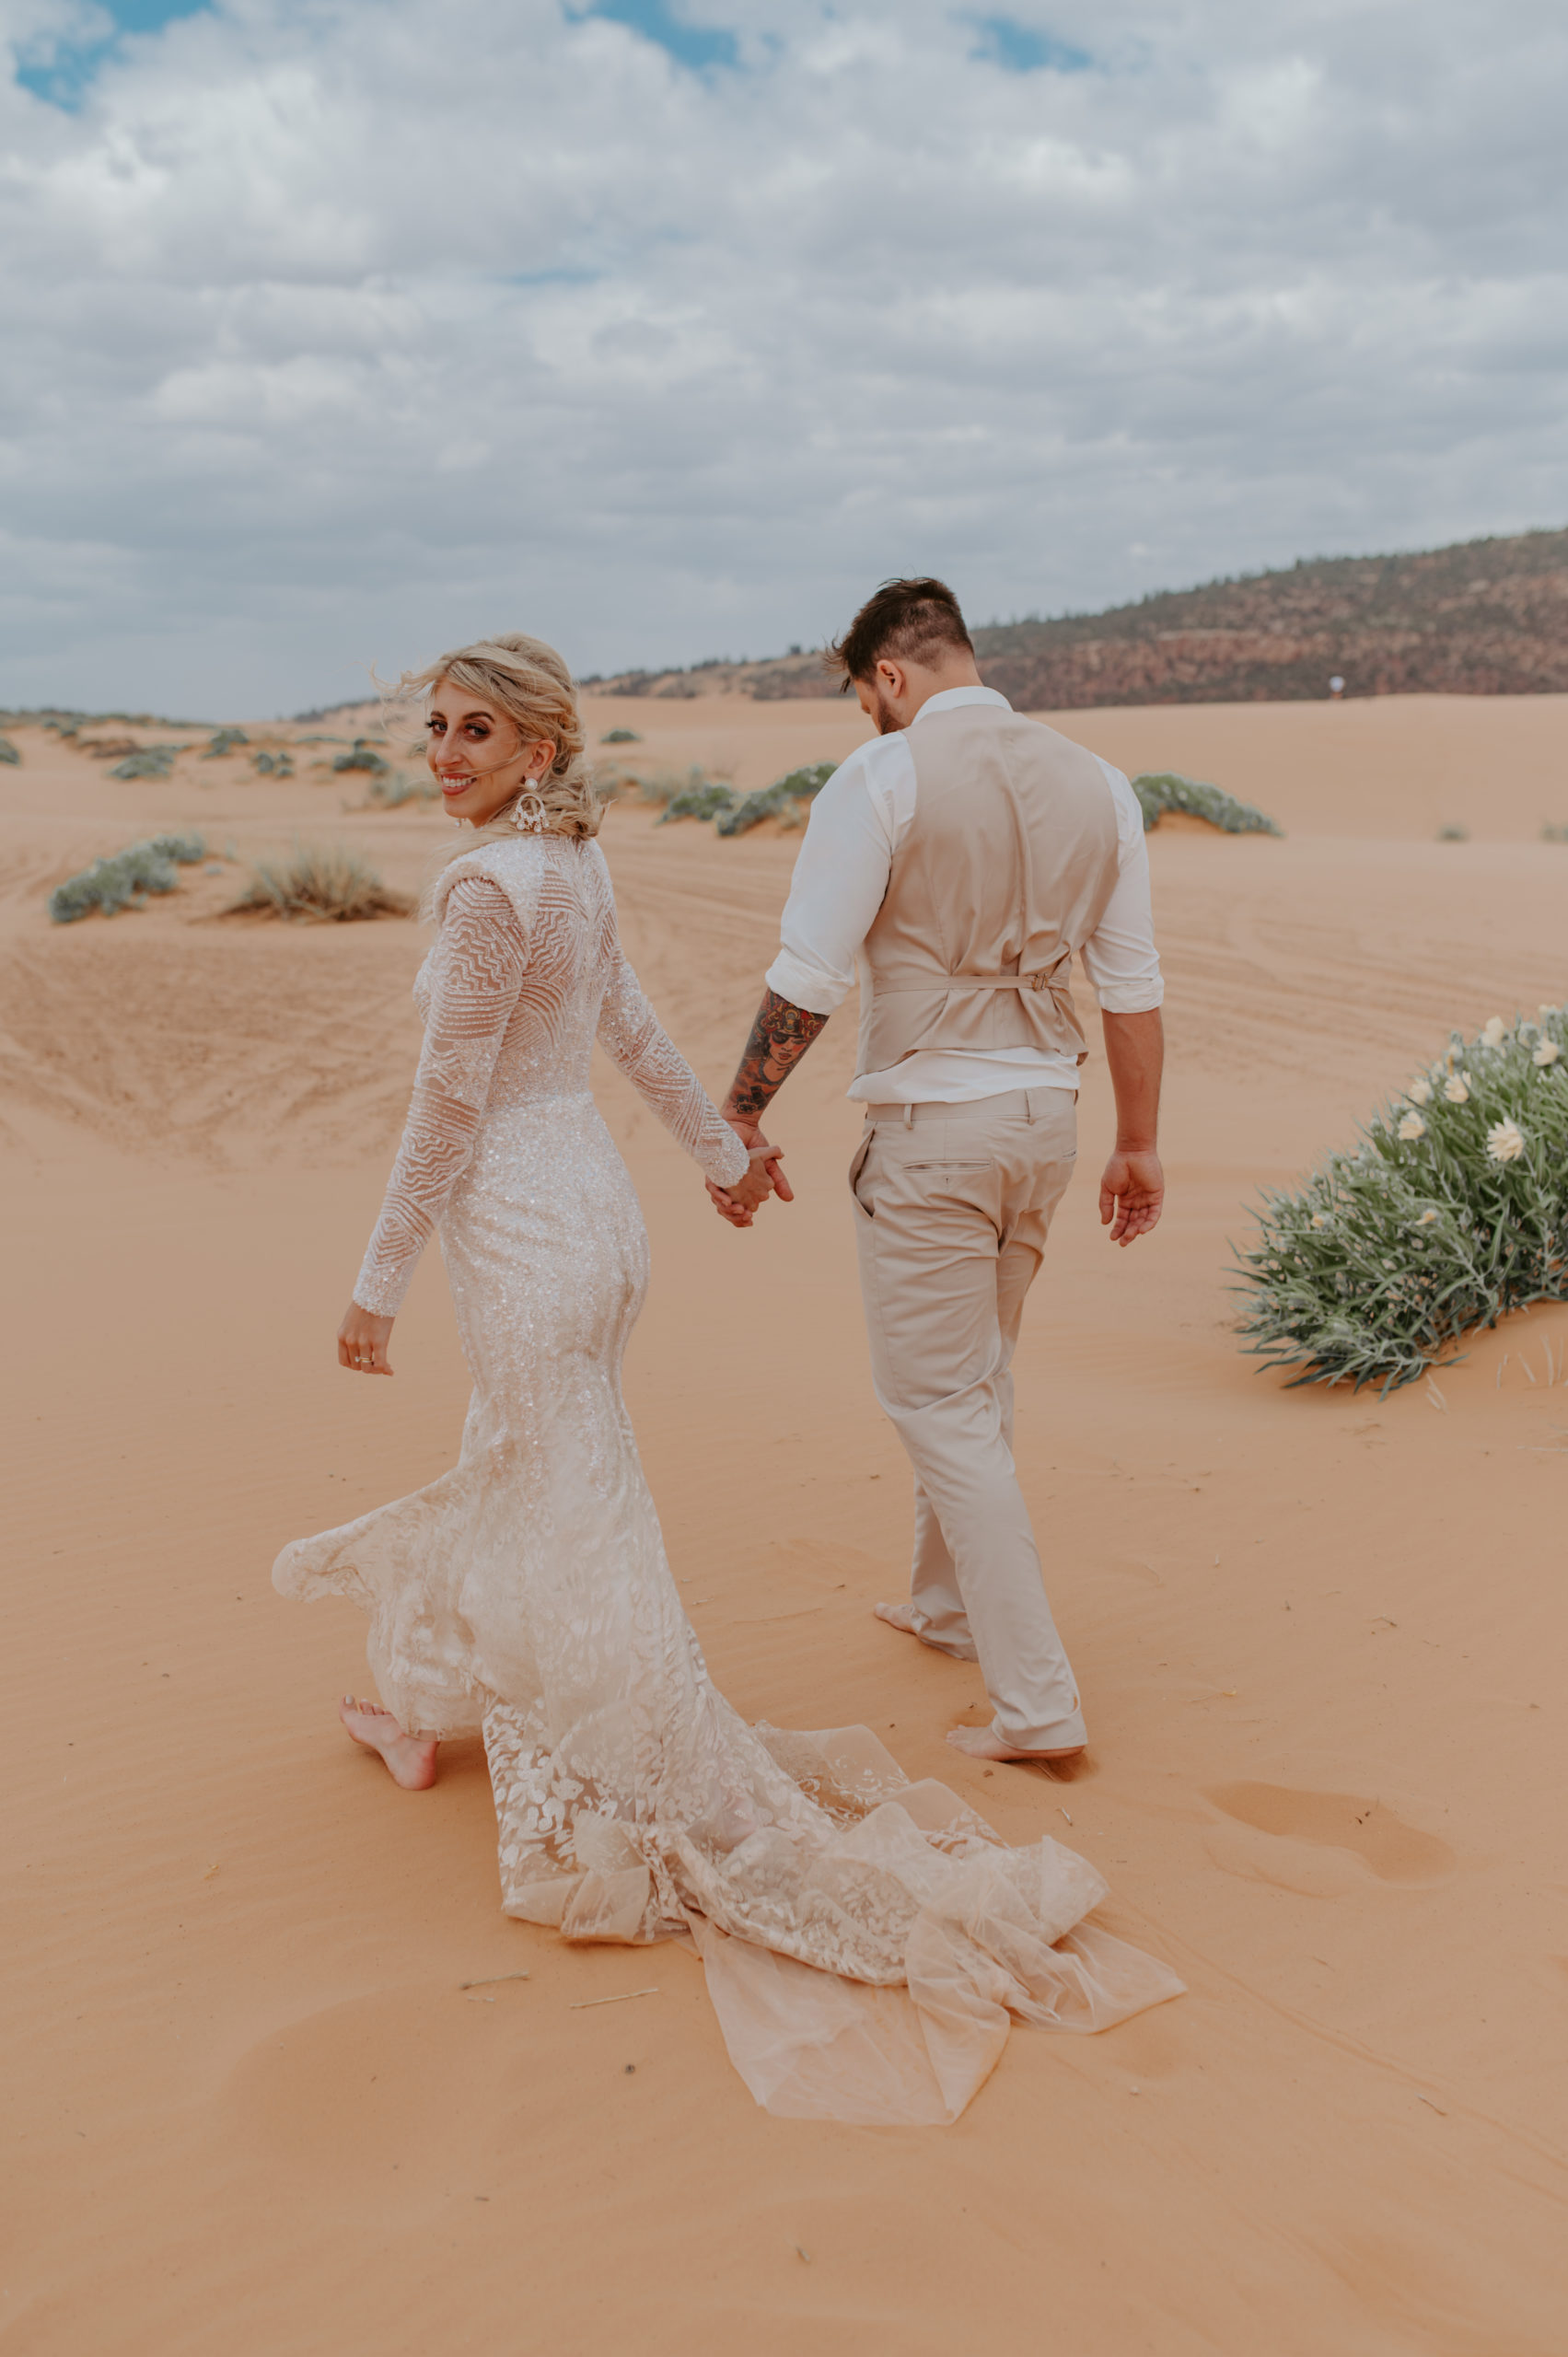 Coral Pink Sand Dunes Wedding Photography
